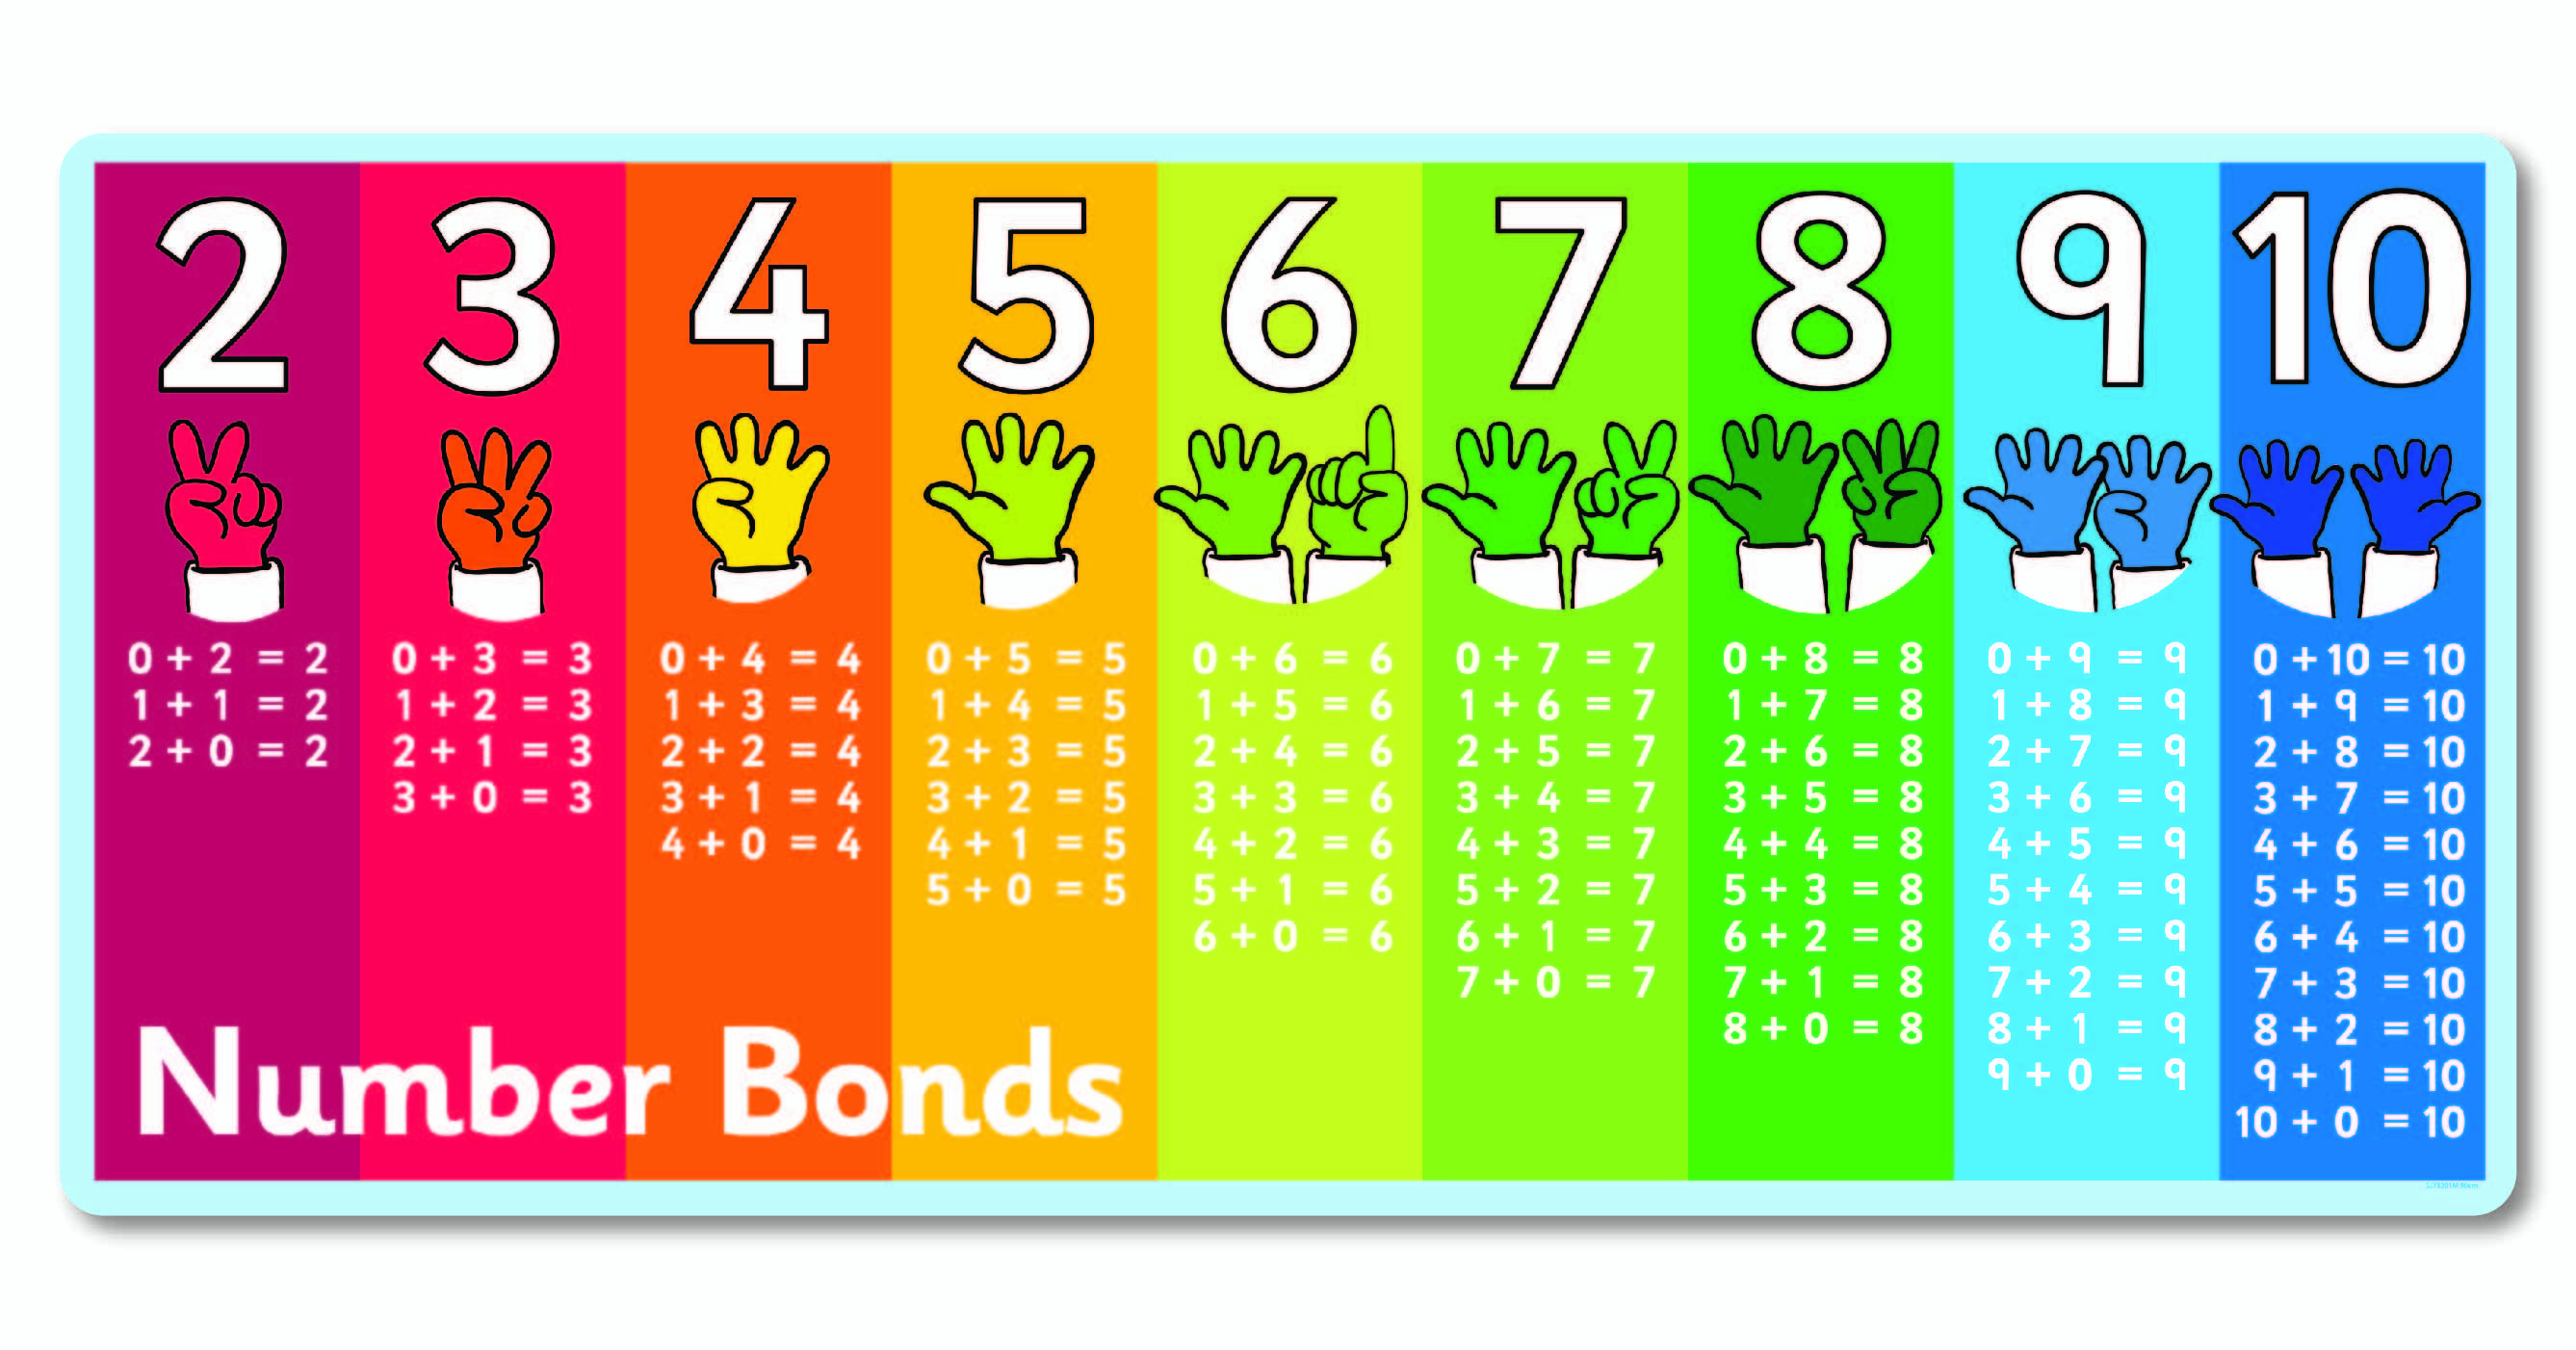 bonds-to-10-recall-number-bonds-to-20-relate-to-number-bonds-to-10